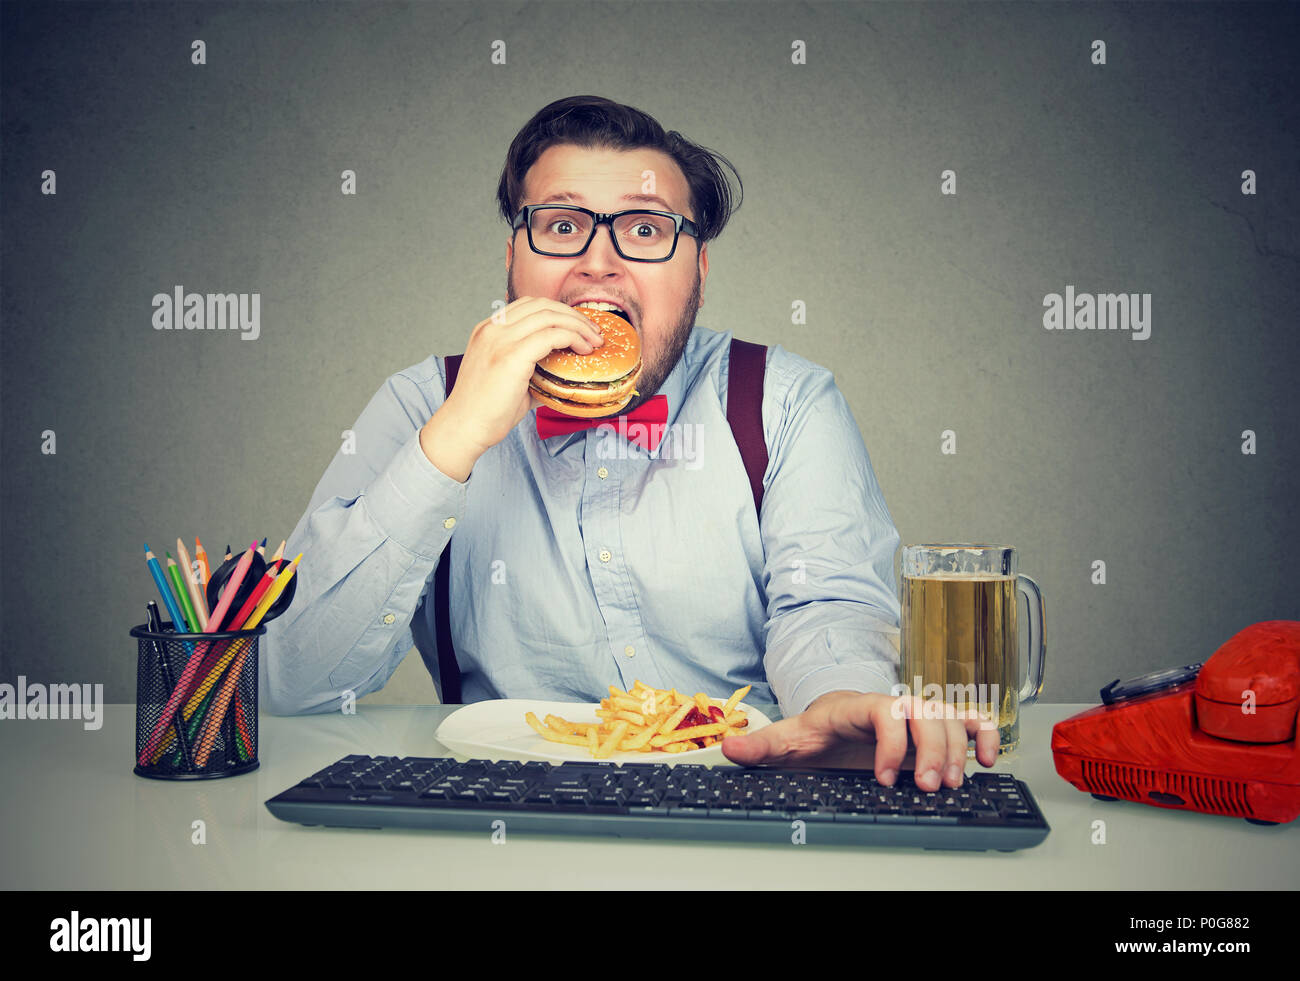 Overweight business man sitting at working place with computer and consuming fast food looking super hungry at†camera Stock Photo